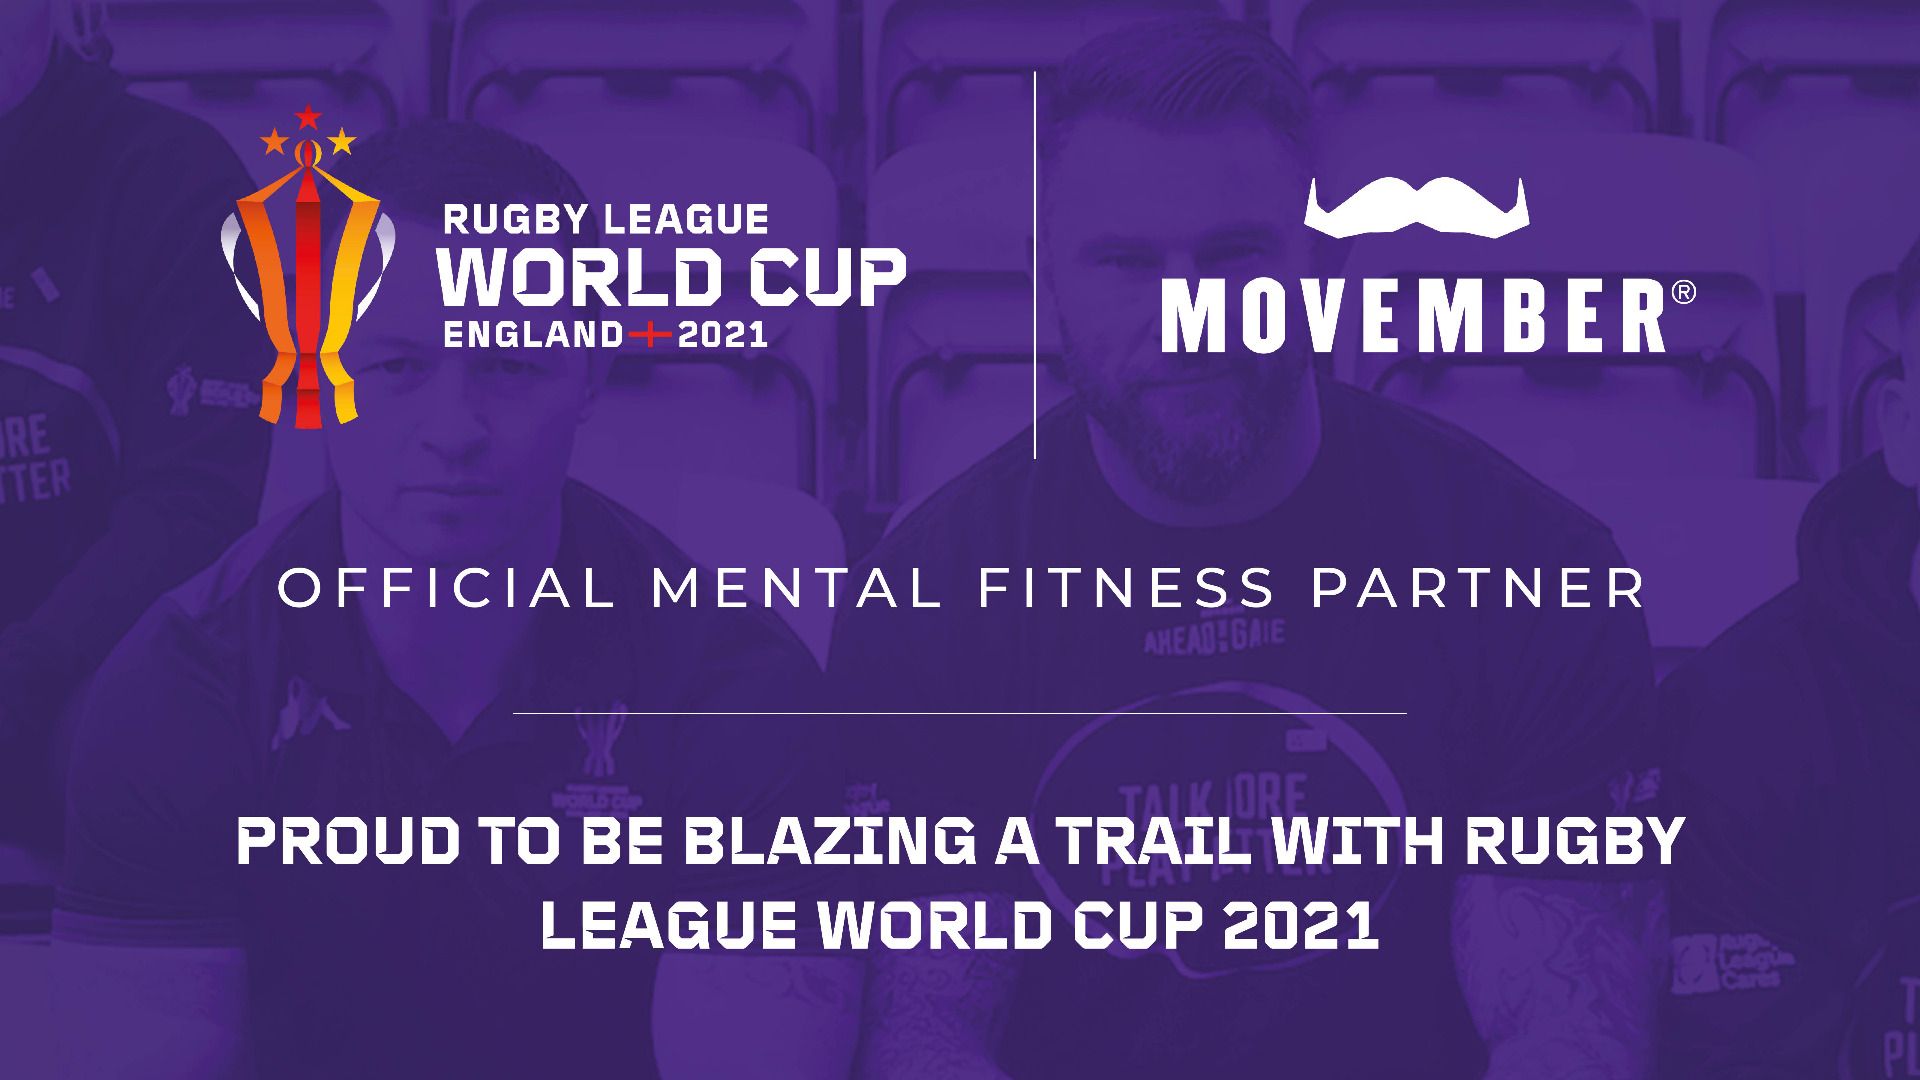 Graphic of Rugby League World Cup and Movember logos